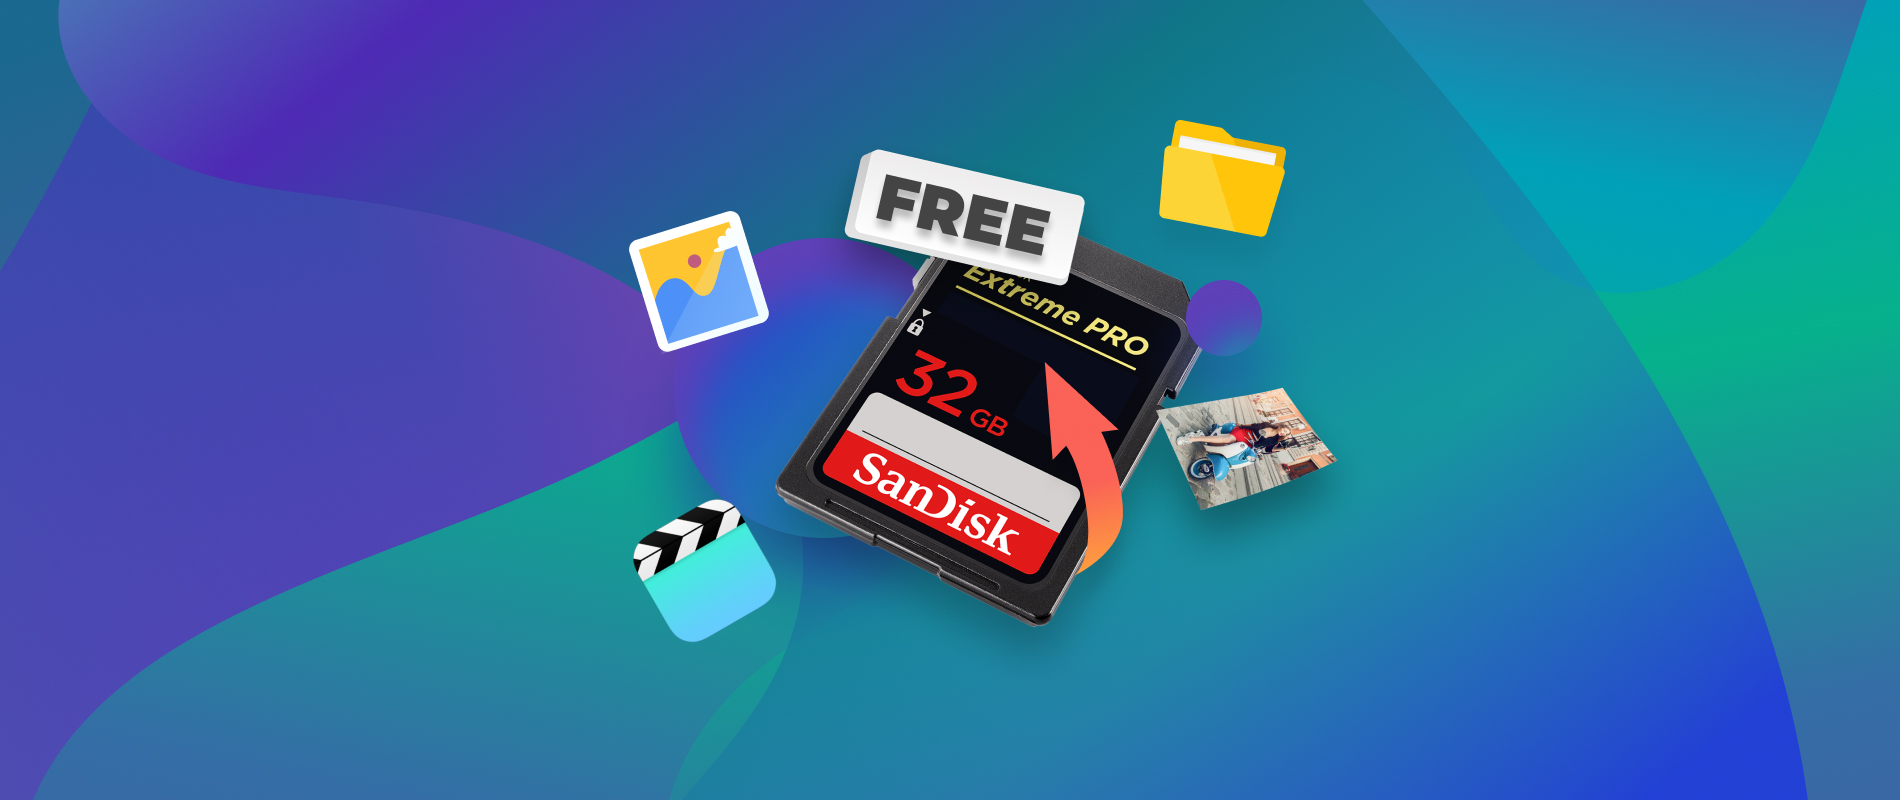 sd card recovery free windows 7